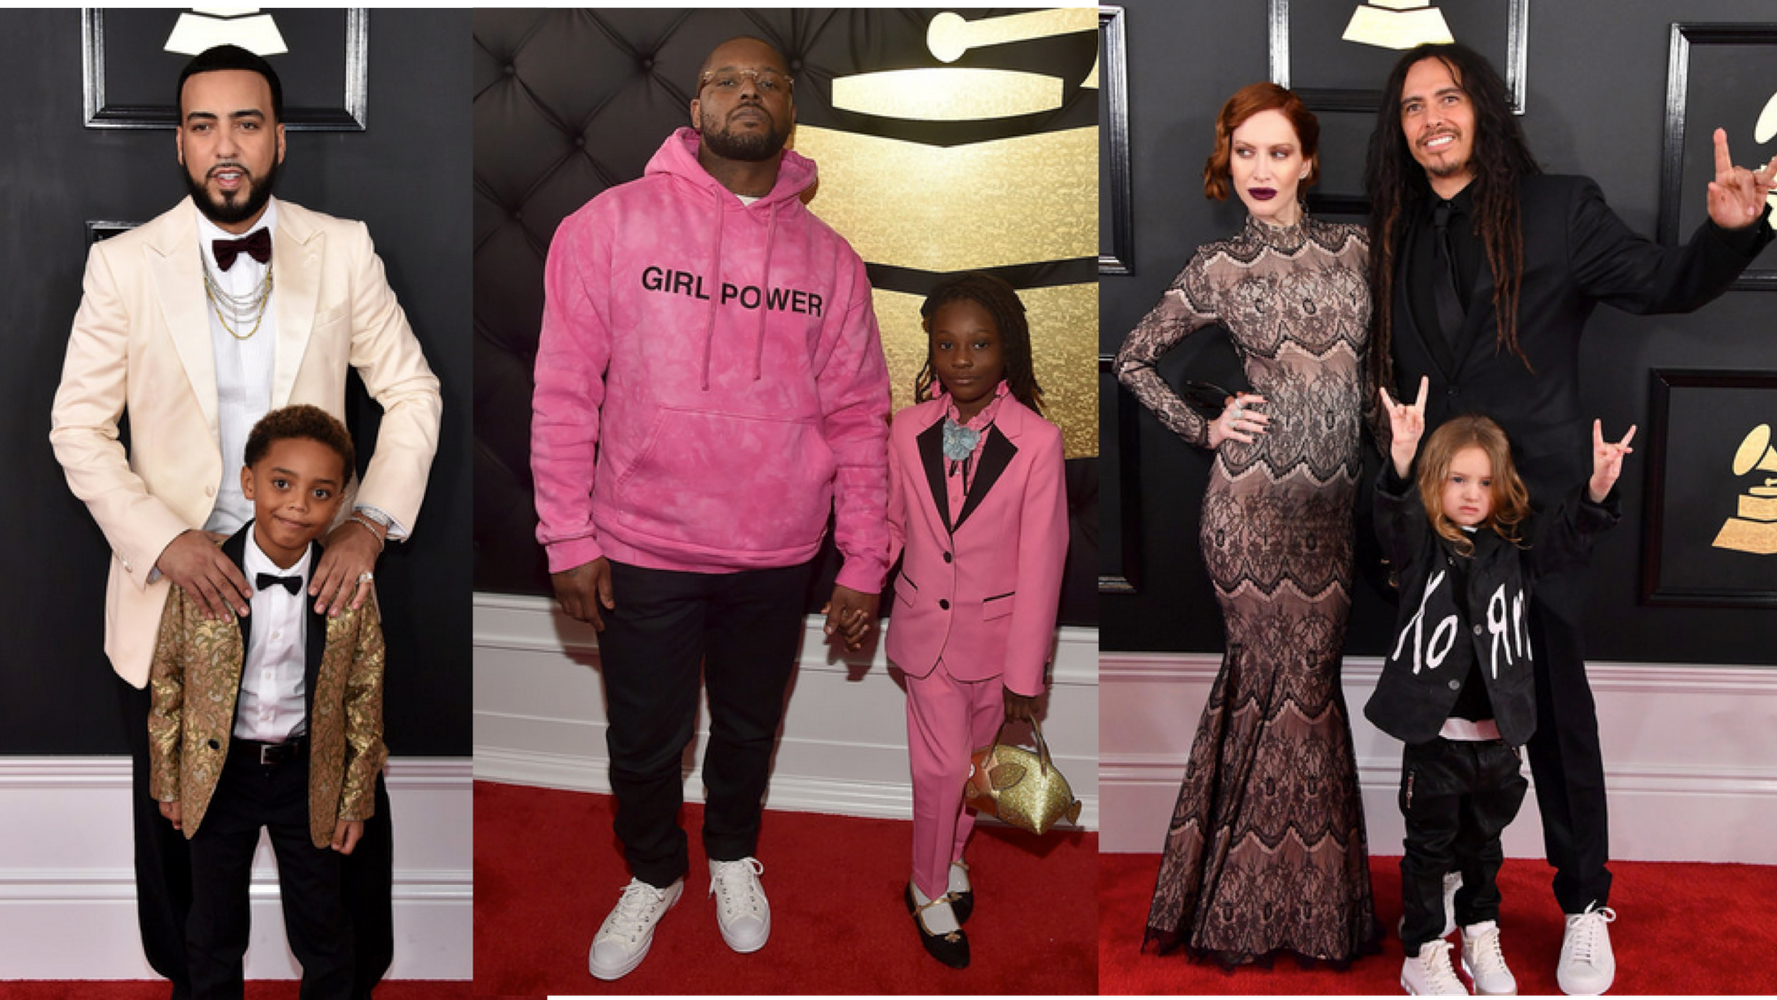 Grammys 2017: Schoolboy Q and Daughter on Red Carpet Photos